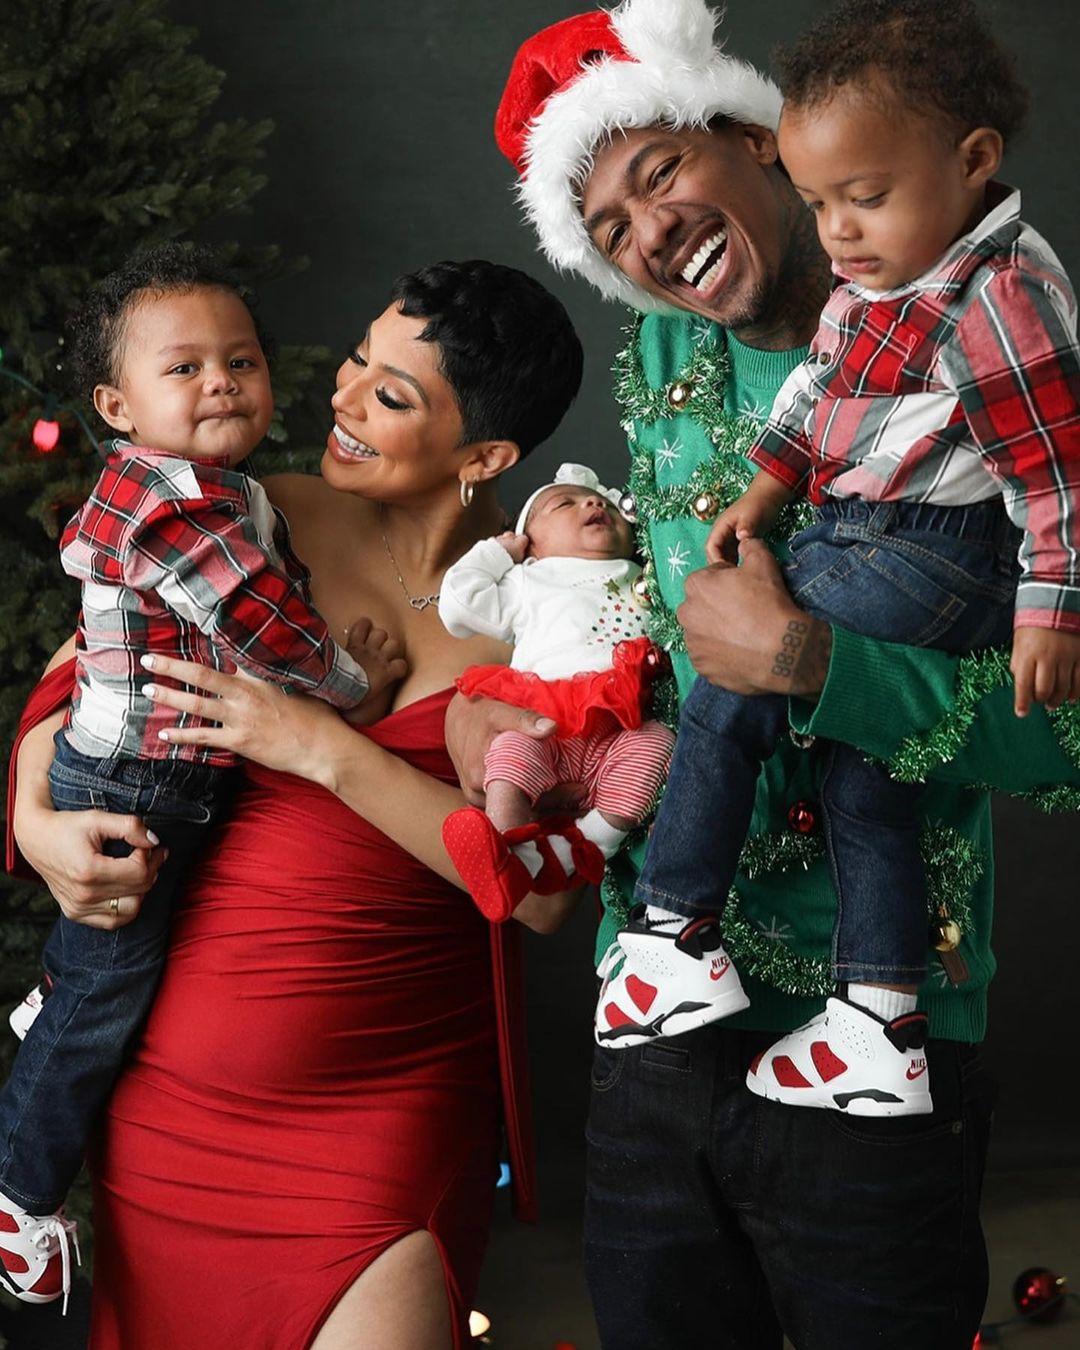 Nick Cannon and Abby De La Rosa with kids for Christmas photo